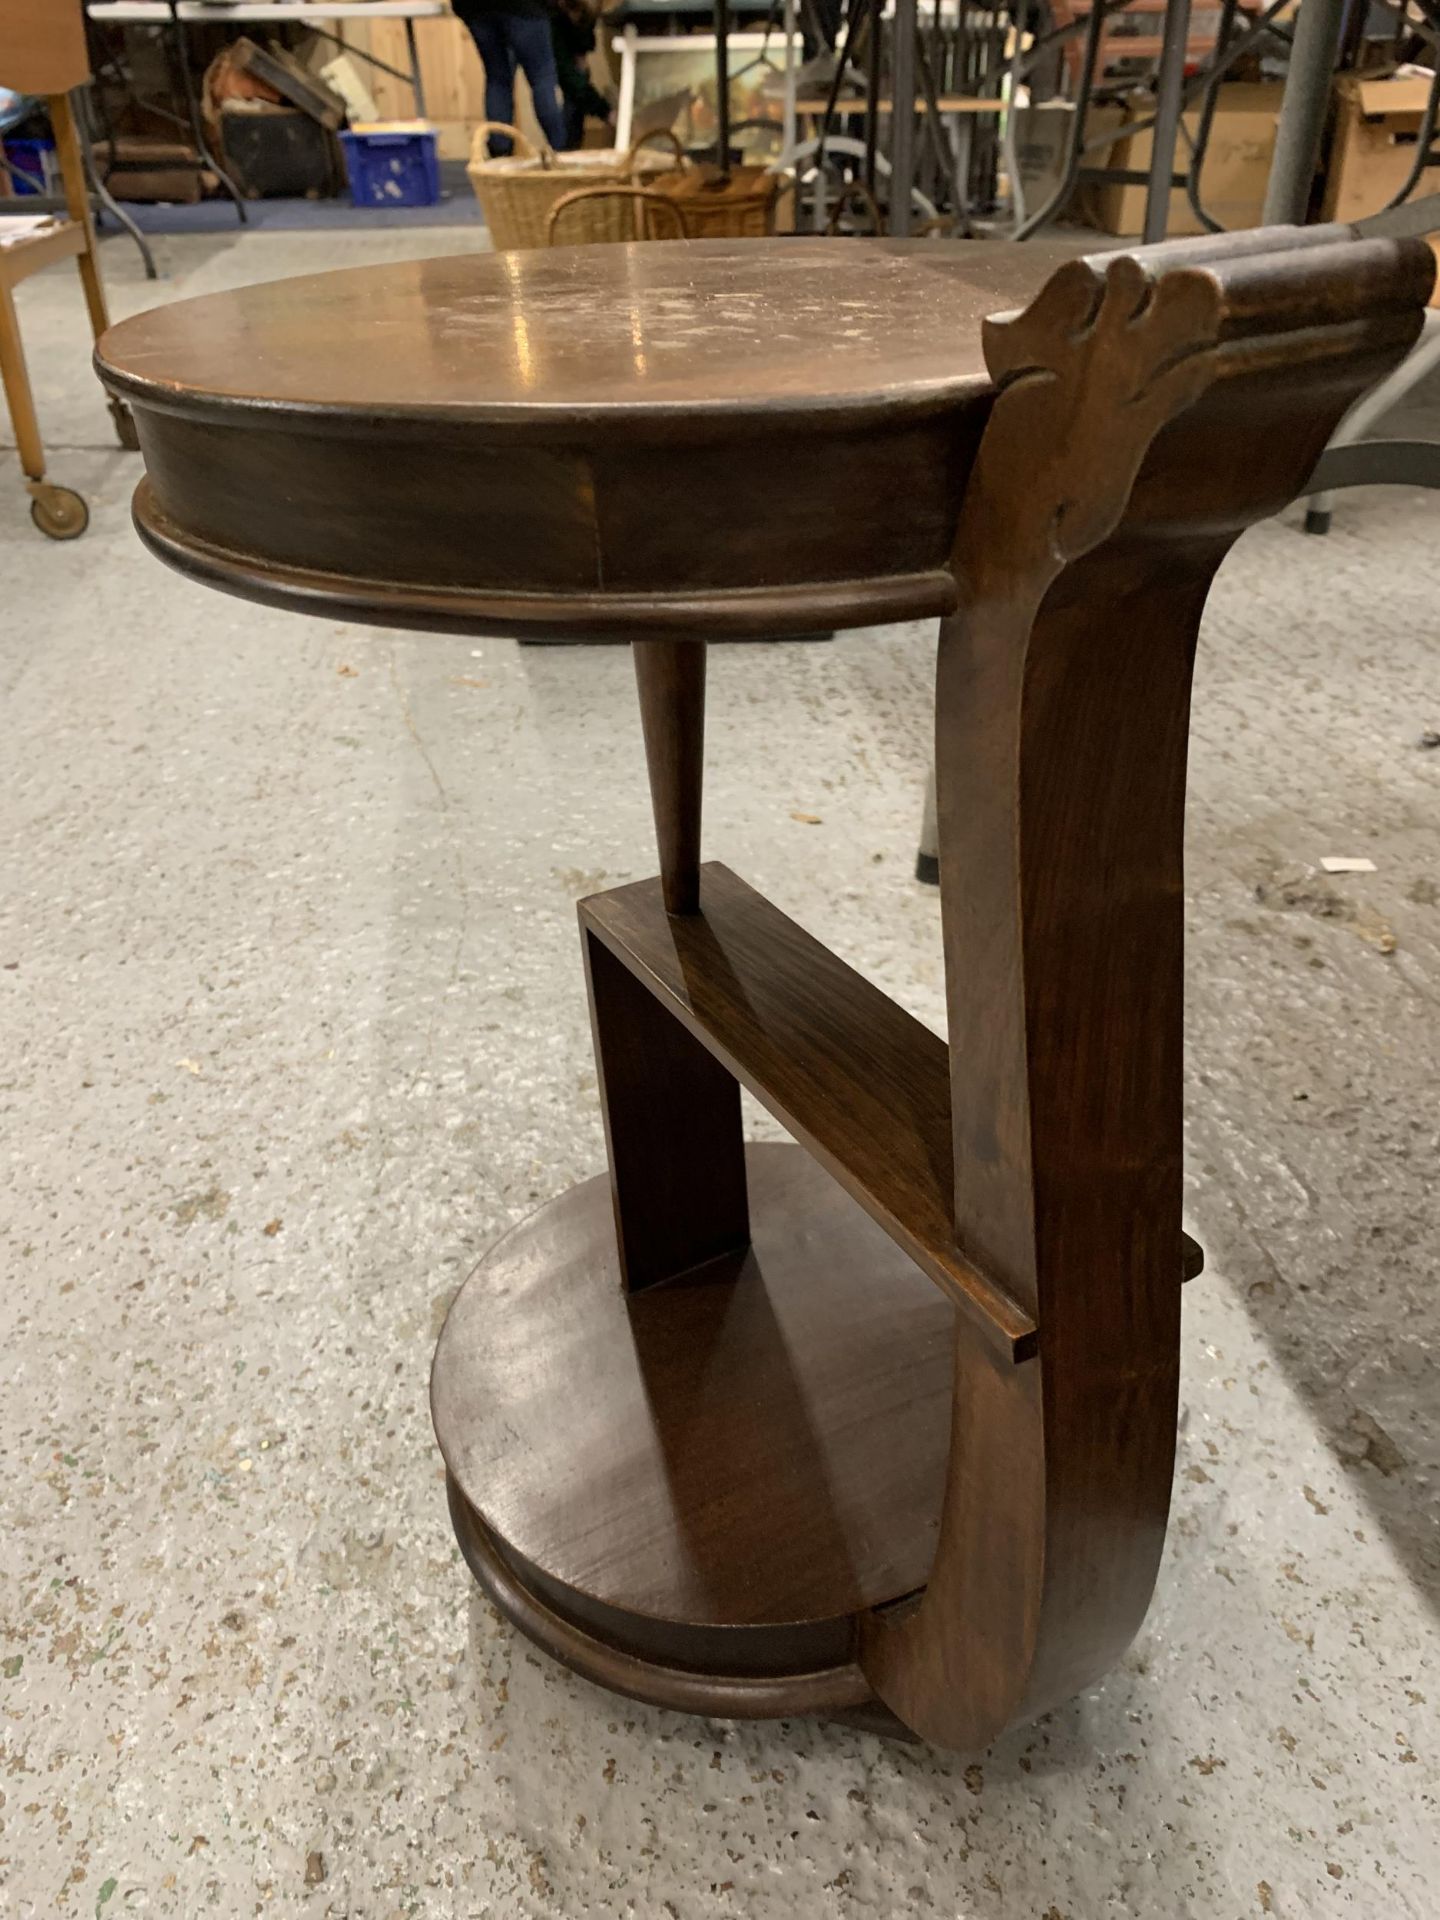 AN ART DECO MAHOGANY CIRCULAR TABLE WITH DRAWER HEIGHT 49.5CM - Image 3 of 3